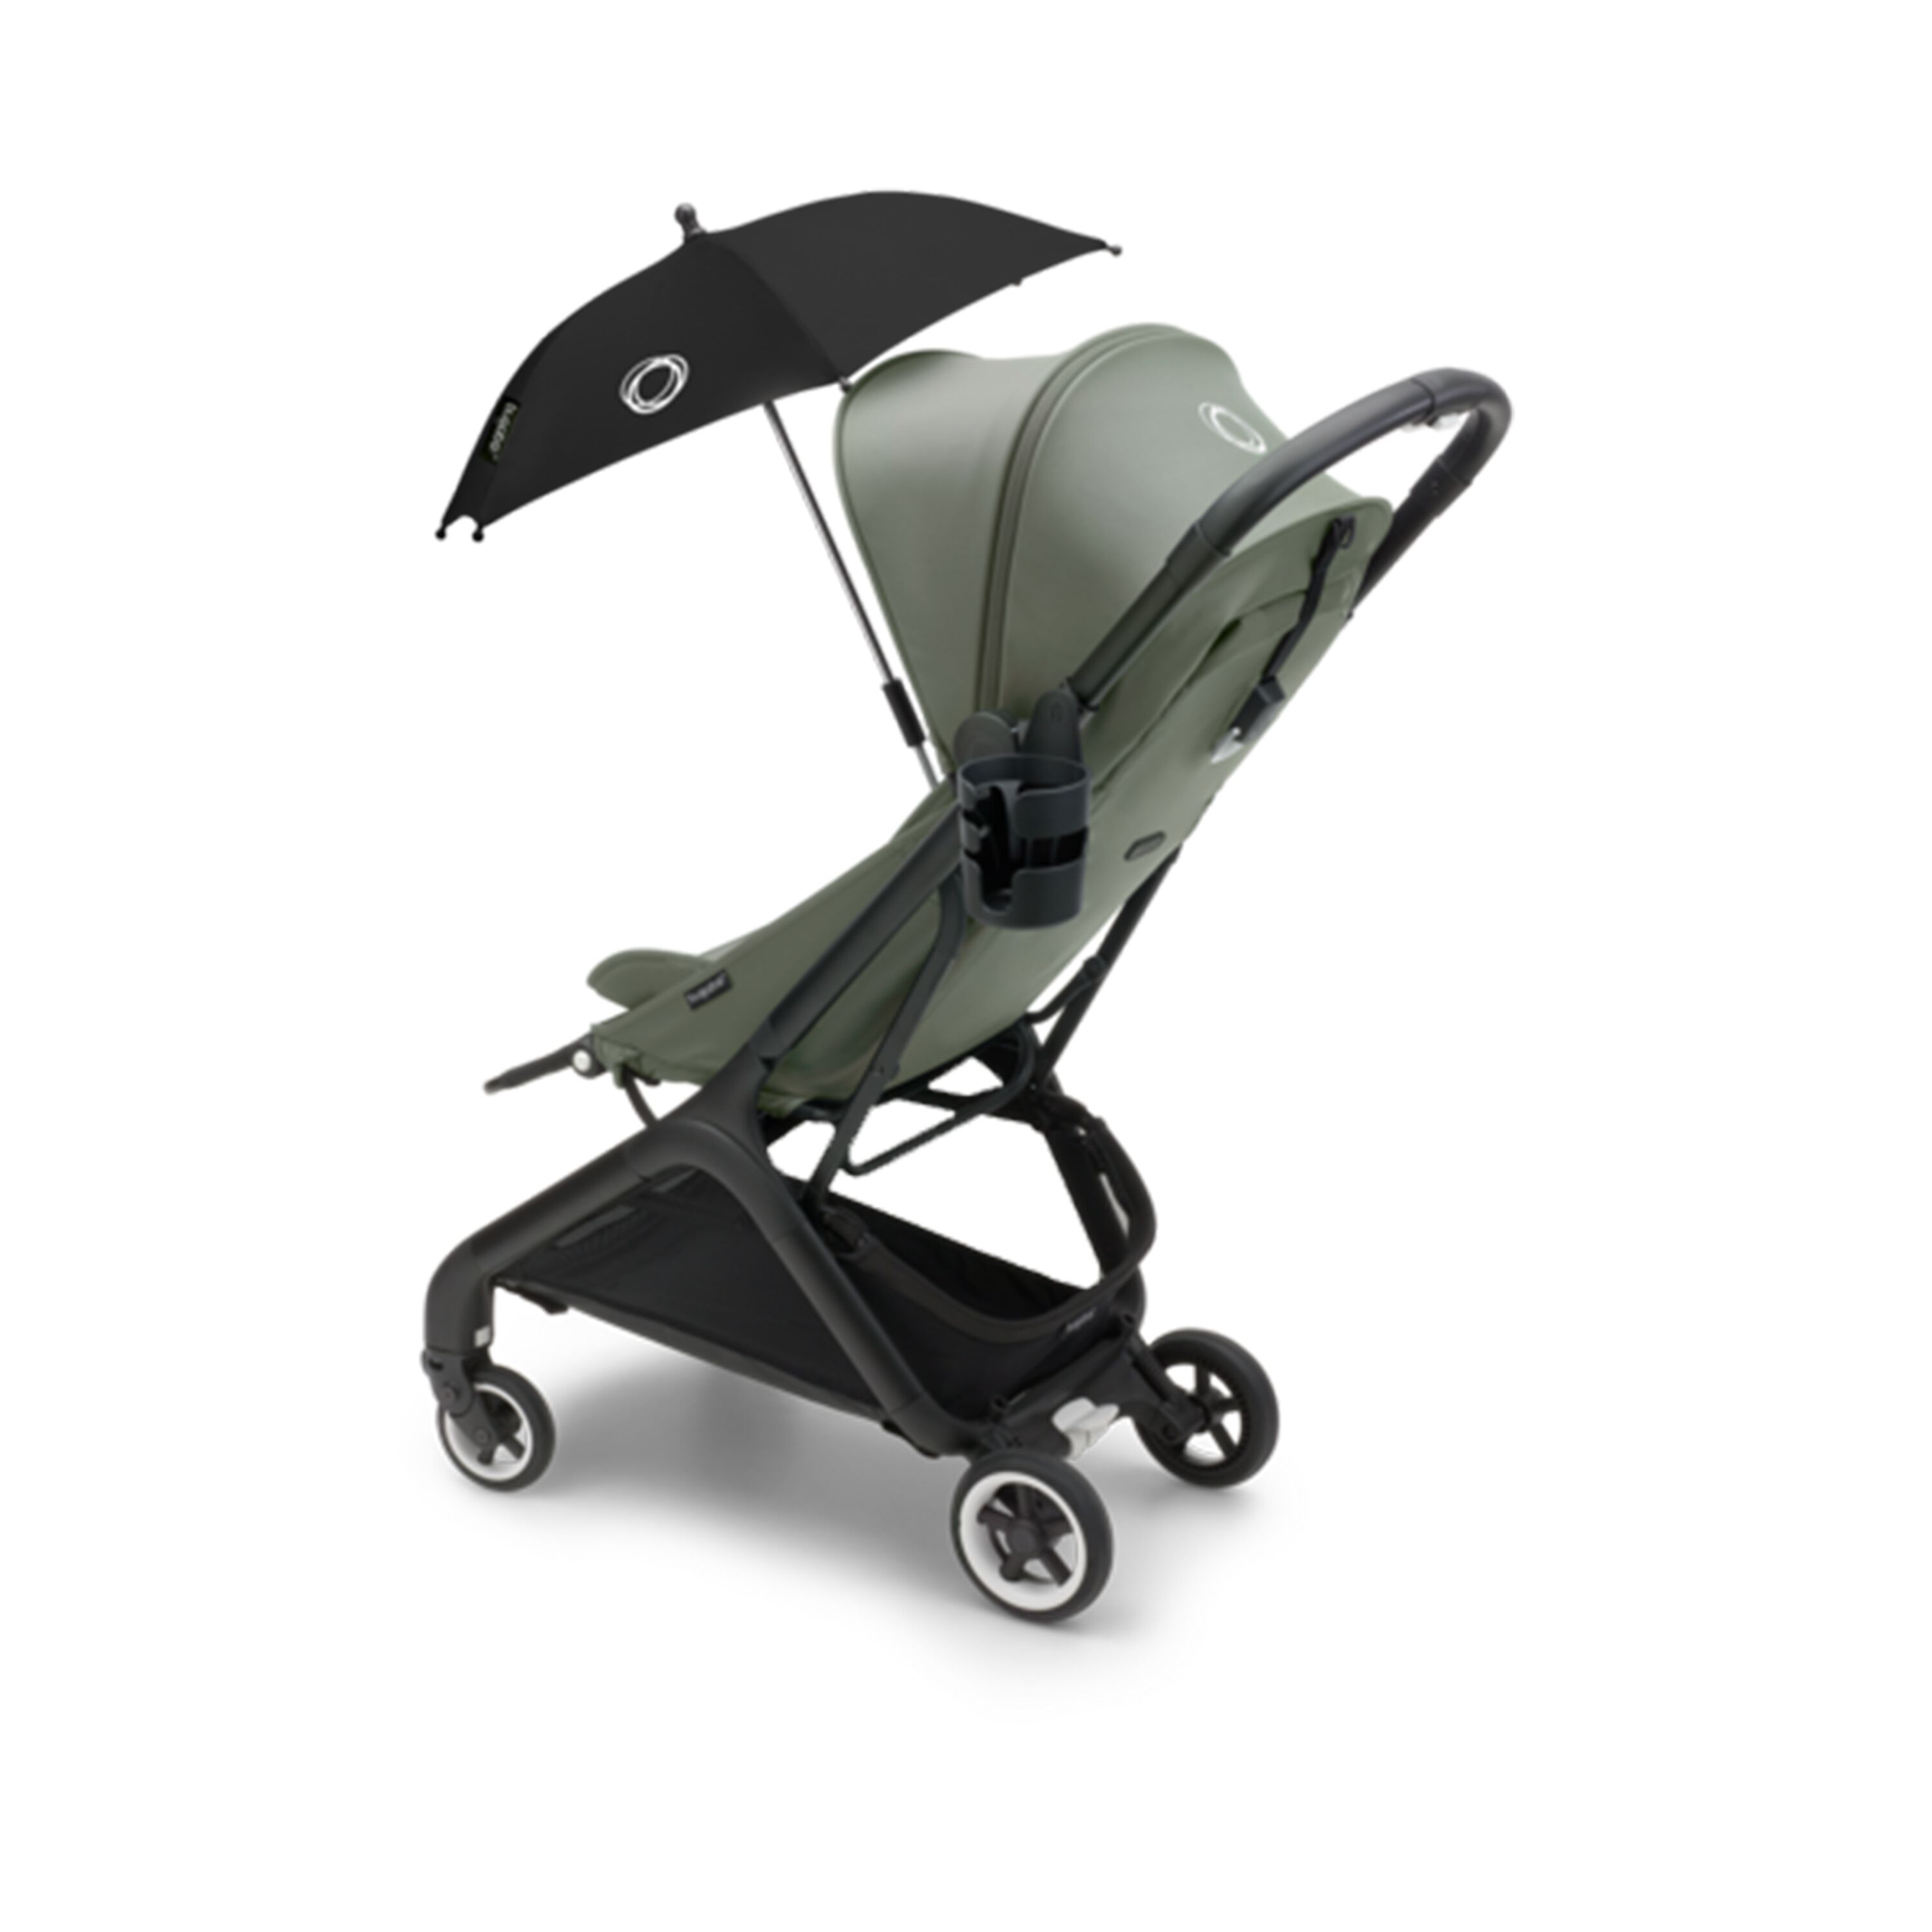 https://www.bugaboo.com/dw/image/v2/BDLP_PRD/on/demandware.static/-/Sites-bugaboo-master/default/dw259cf00c/images/80500CH03/80500CH03-BGB-Butterfly-cup-holder-seat-02.jpg?sw=3000&sfrm=png